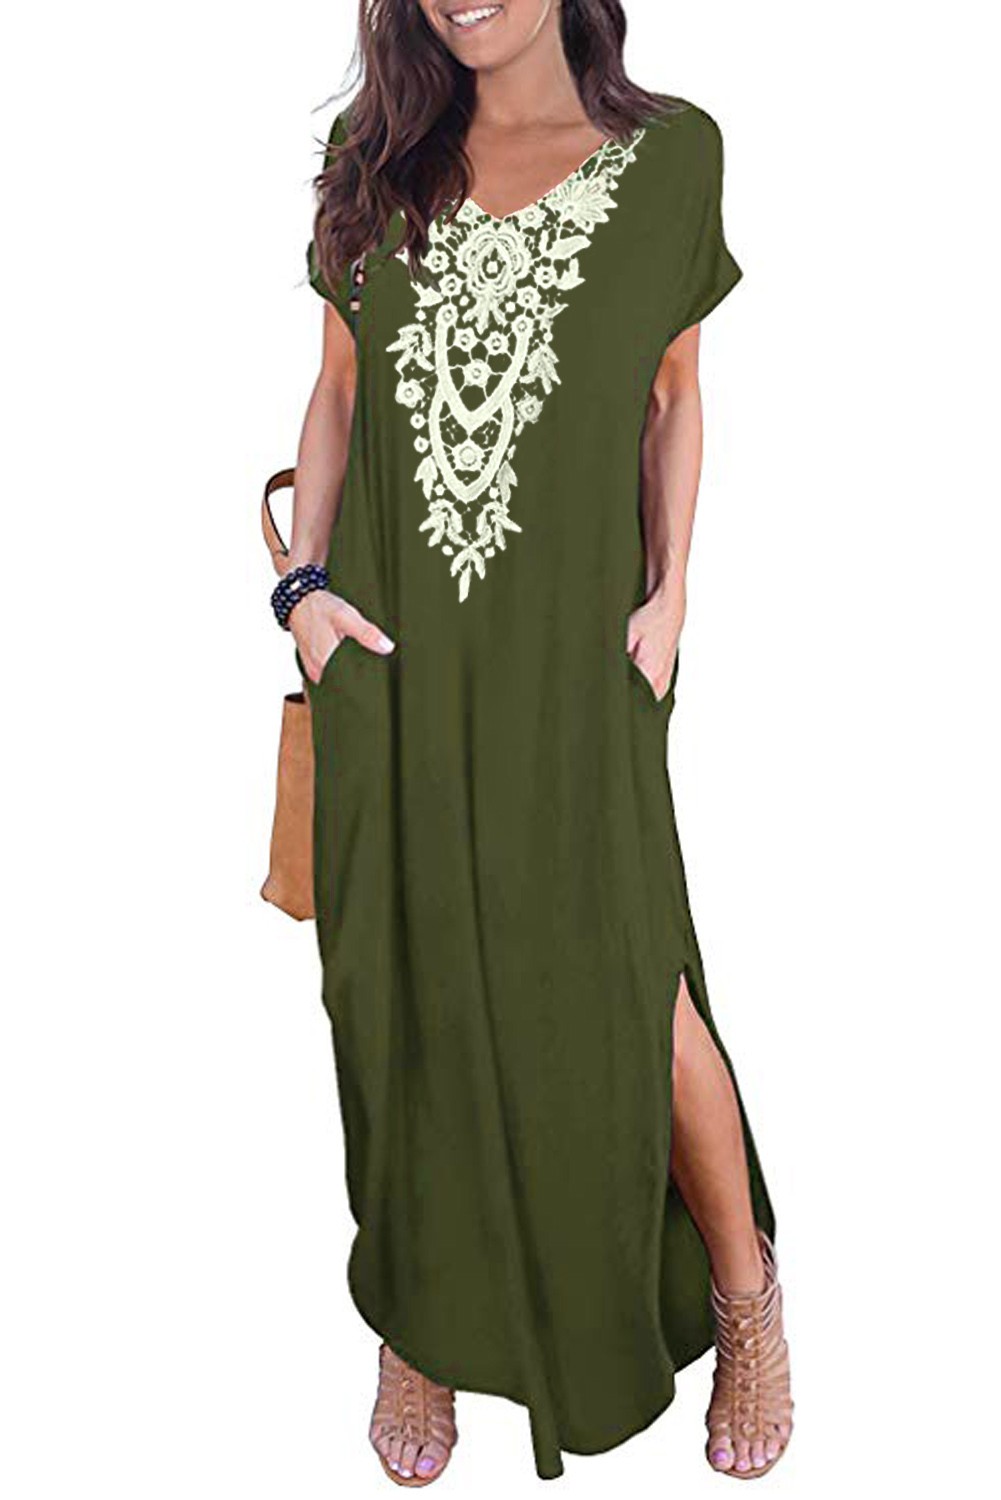 Green Lace Front Pocket Short Sleeve Split Casual Loose Maxi Dress